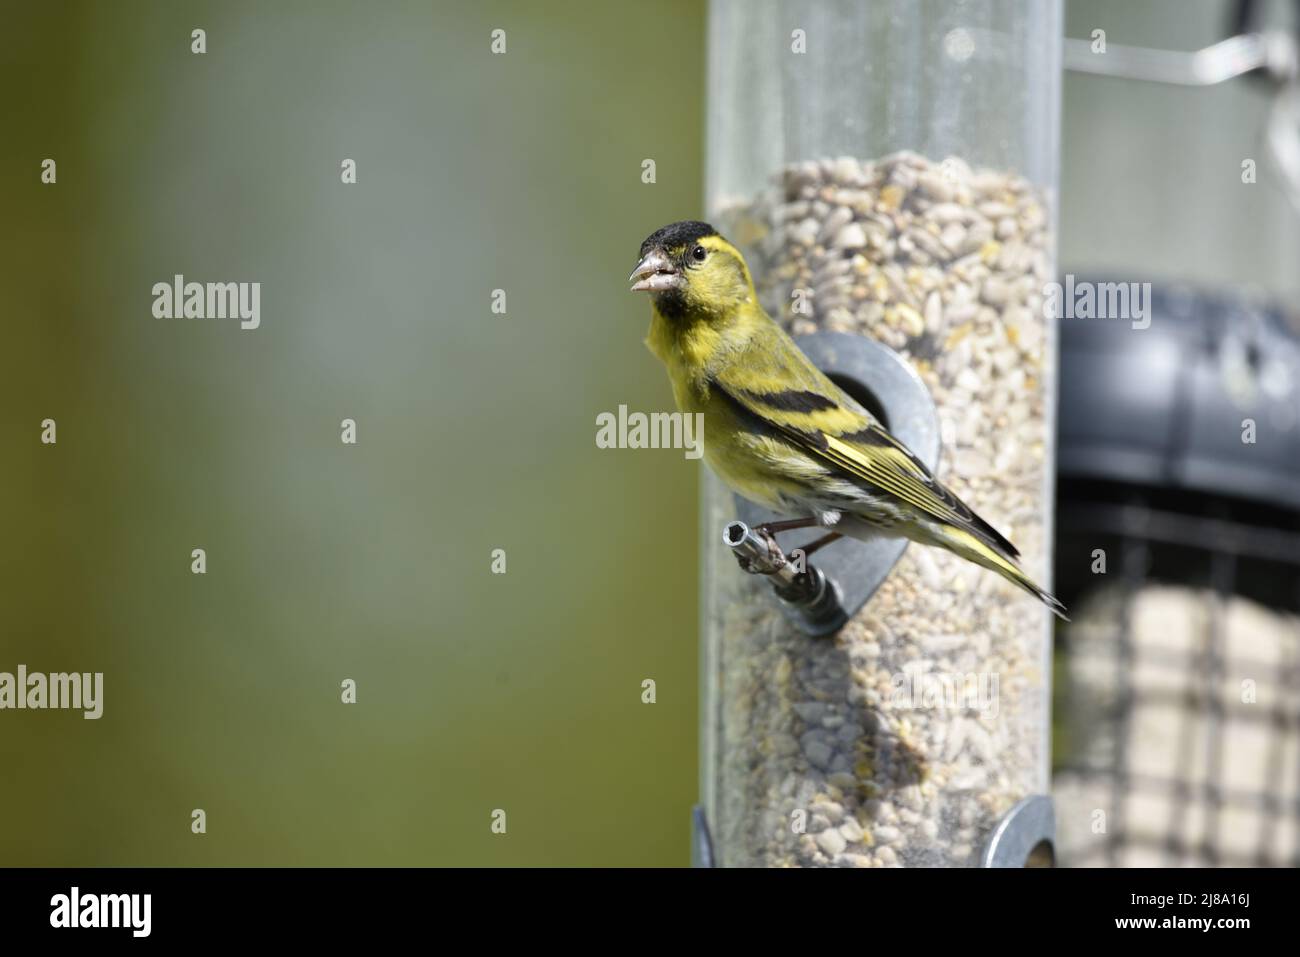 Close-Up Left-Profile Image of a Male Eurasian Siskin (Carduelis spinus) Looking Outwards from a Mixed Seed Feeder Peg, Against a Green Background Stock Photo